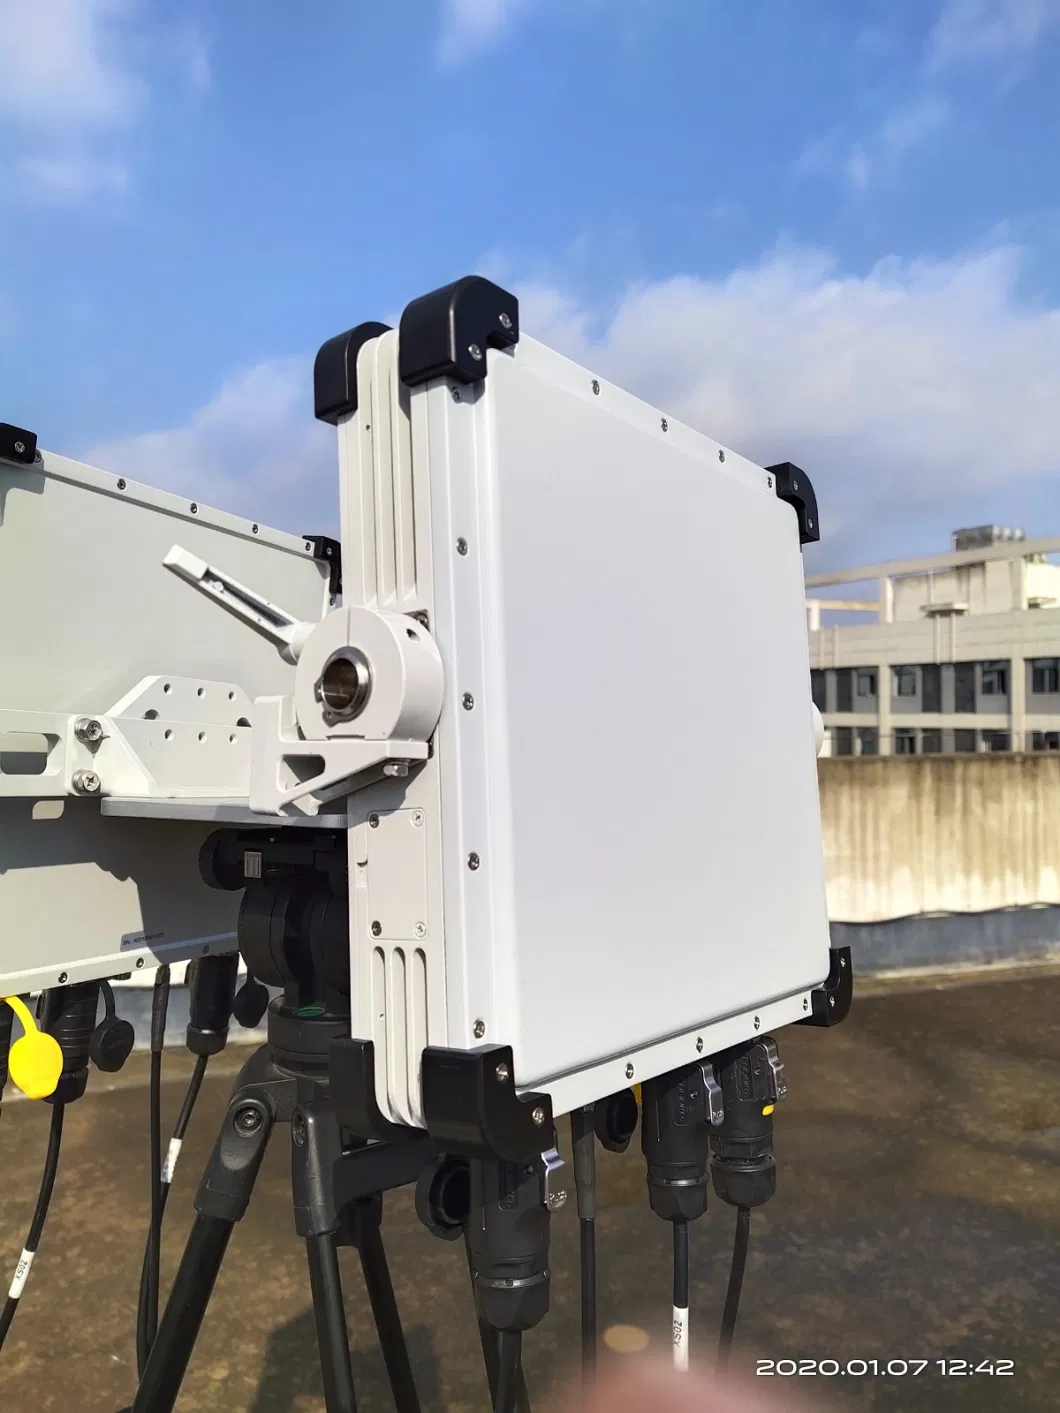 Pulse Doppler Technology Based Radar Providing Wide-Area Ground Surveillance for Border Security and Perimeter Protection Applications